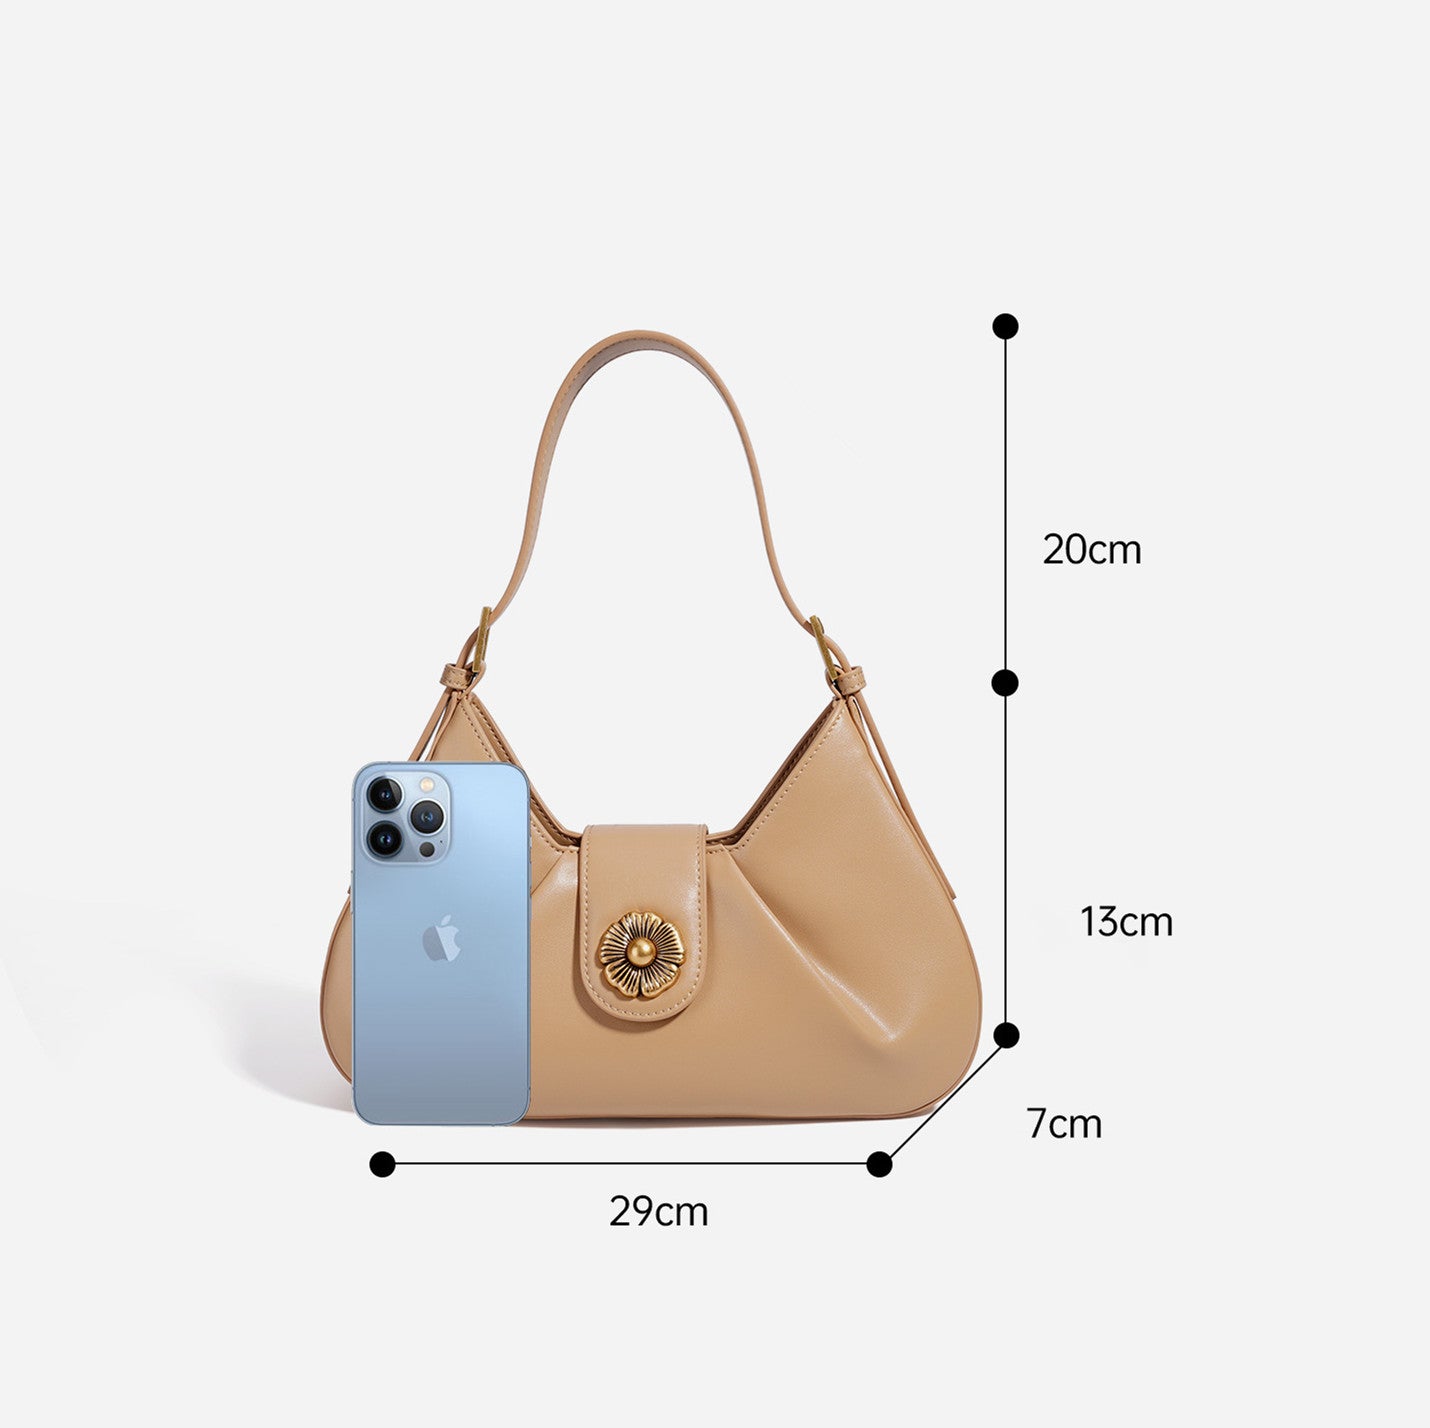 Versatile Leather Tote Handbag that Can be Carried in Multiple Ways